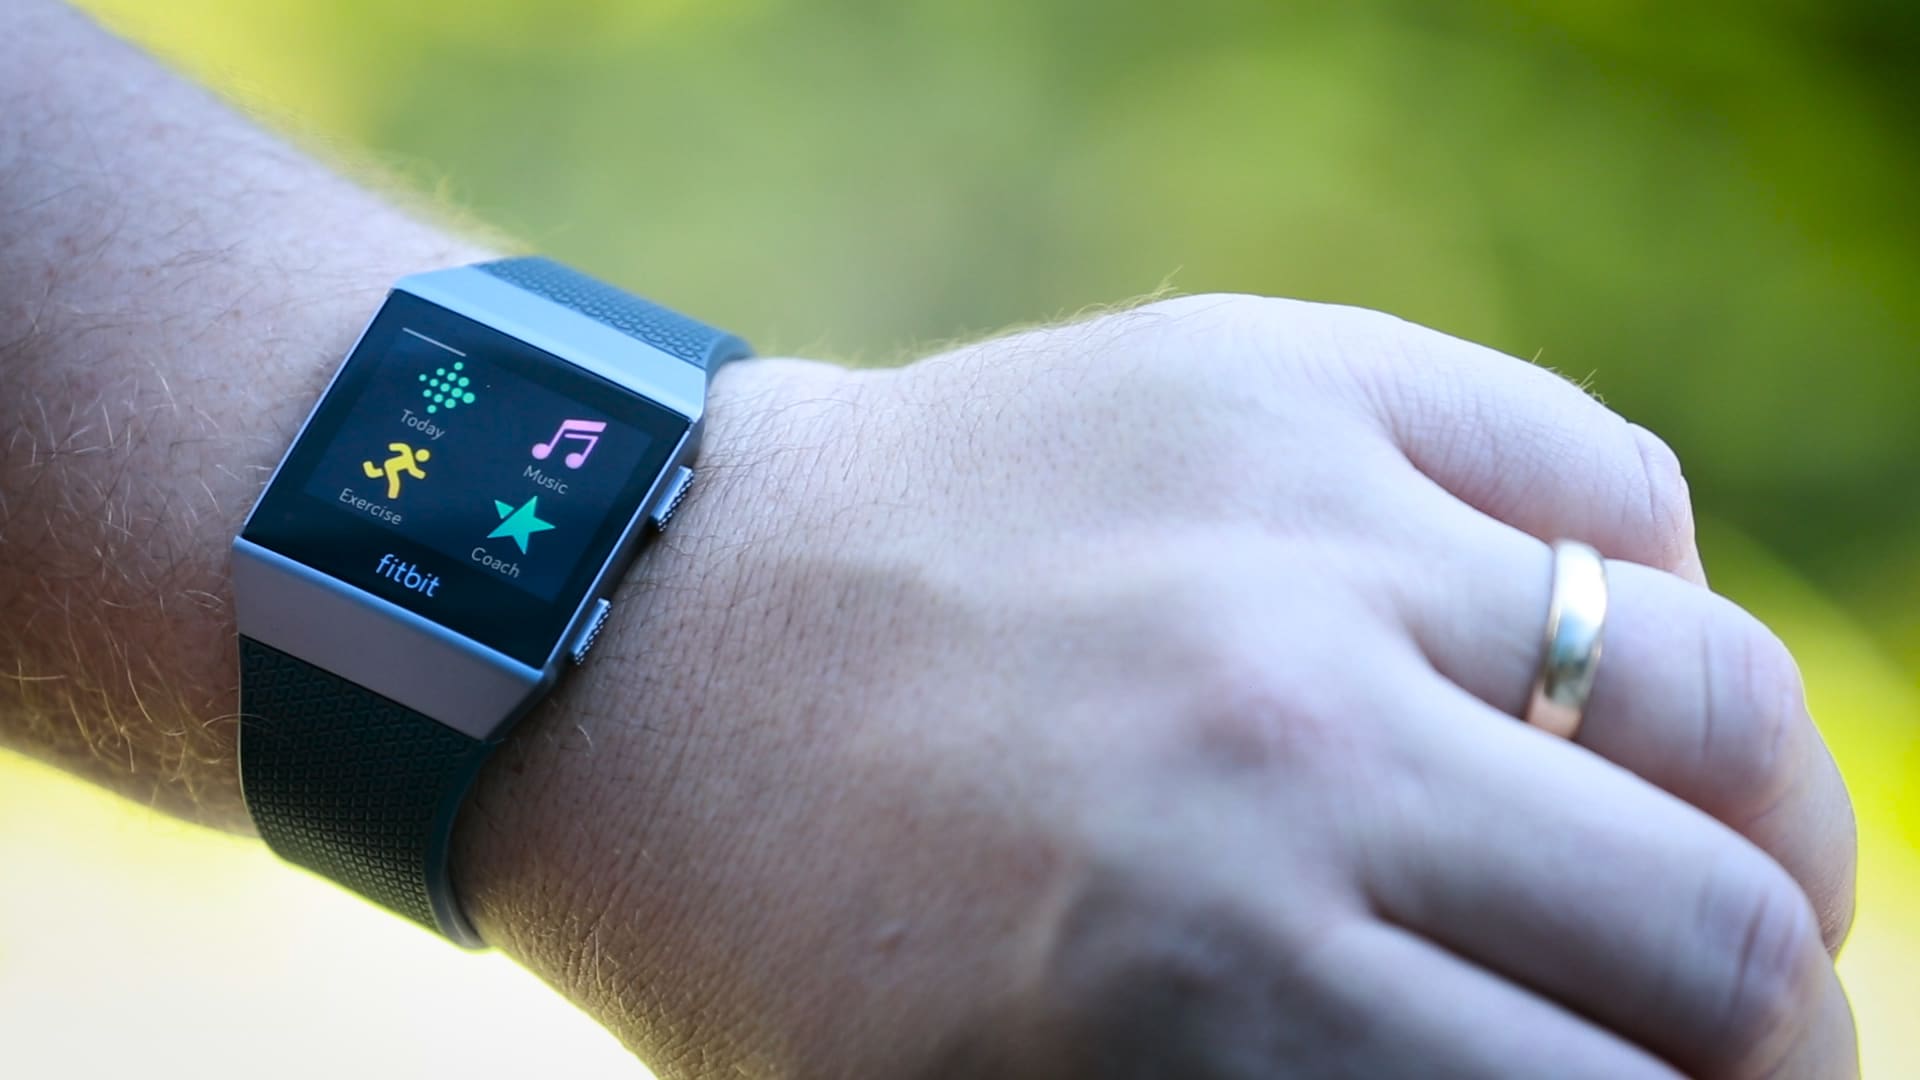 Apple Pay rival Fitbit Pay launches in 